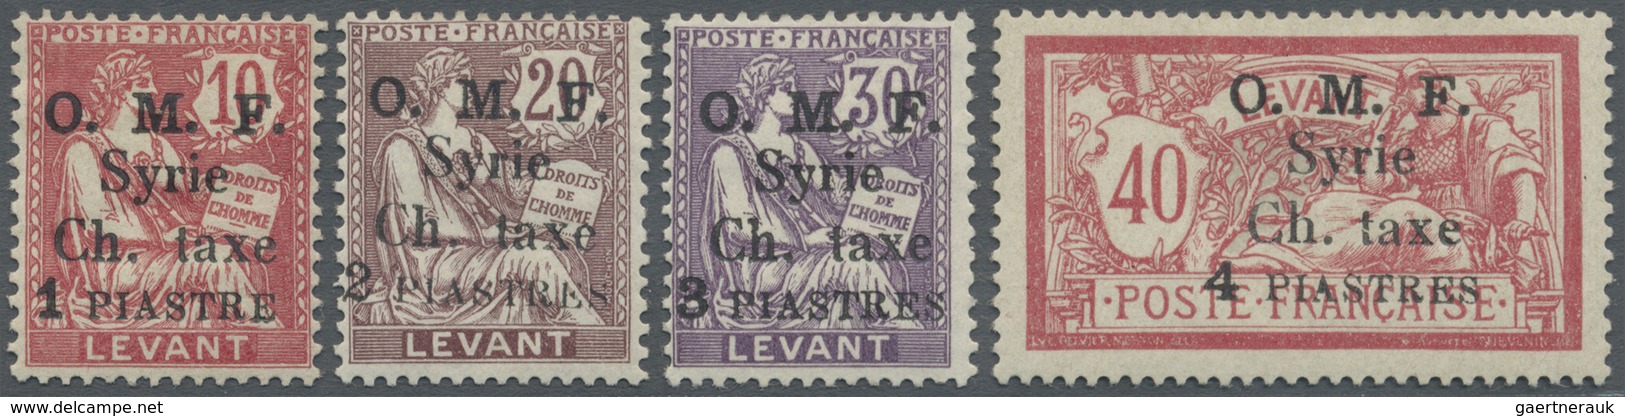 * Syrien - Portomarken: 1920, O.M.F. Overprints On French Levant, Complete Set Of Four Values, Mint O. - Syria